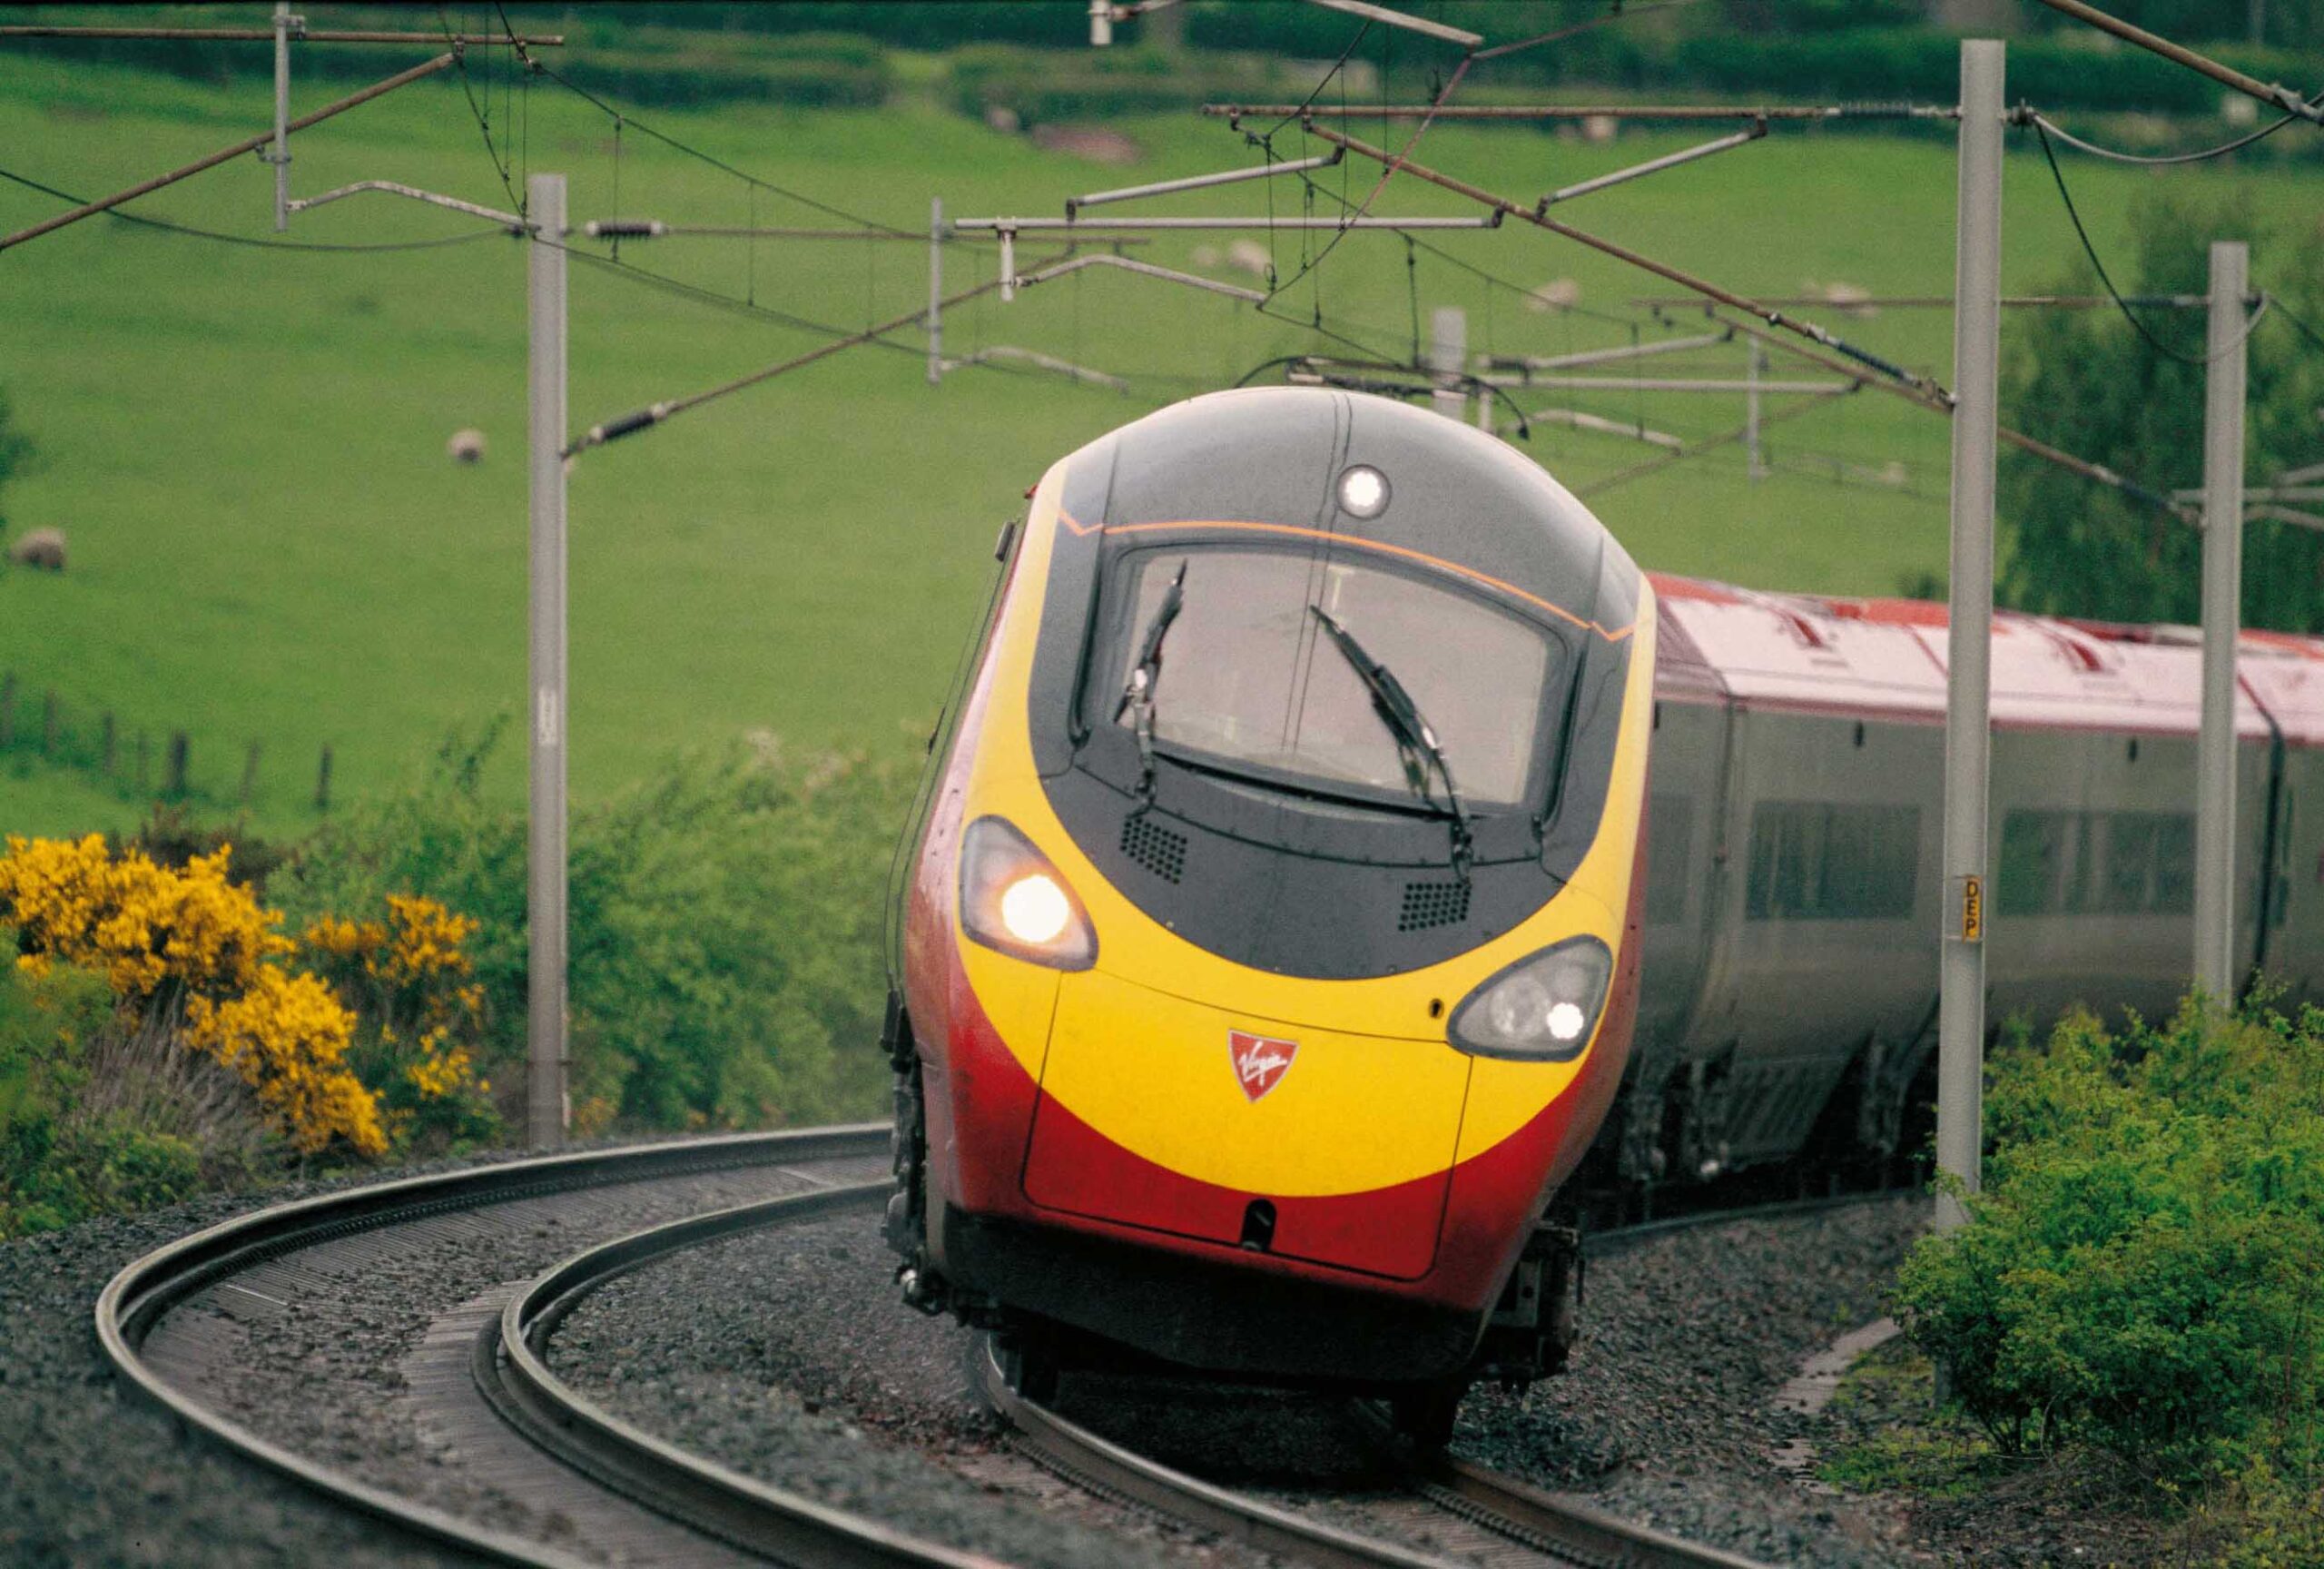 How to book cheap train tickets from London to Edinburgh?